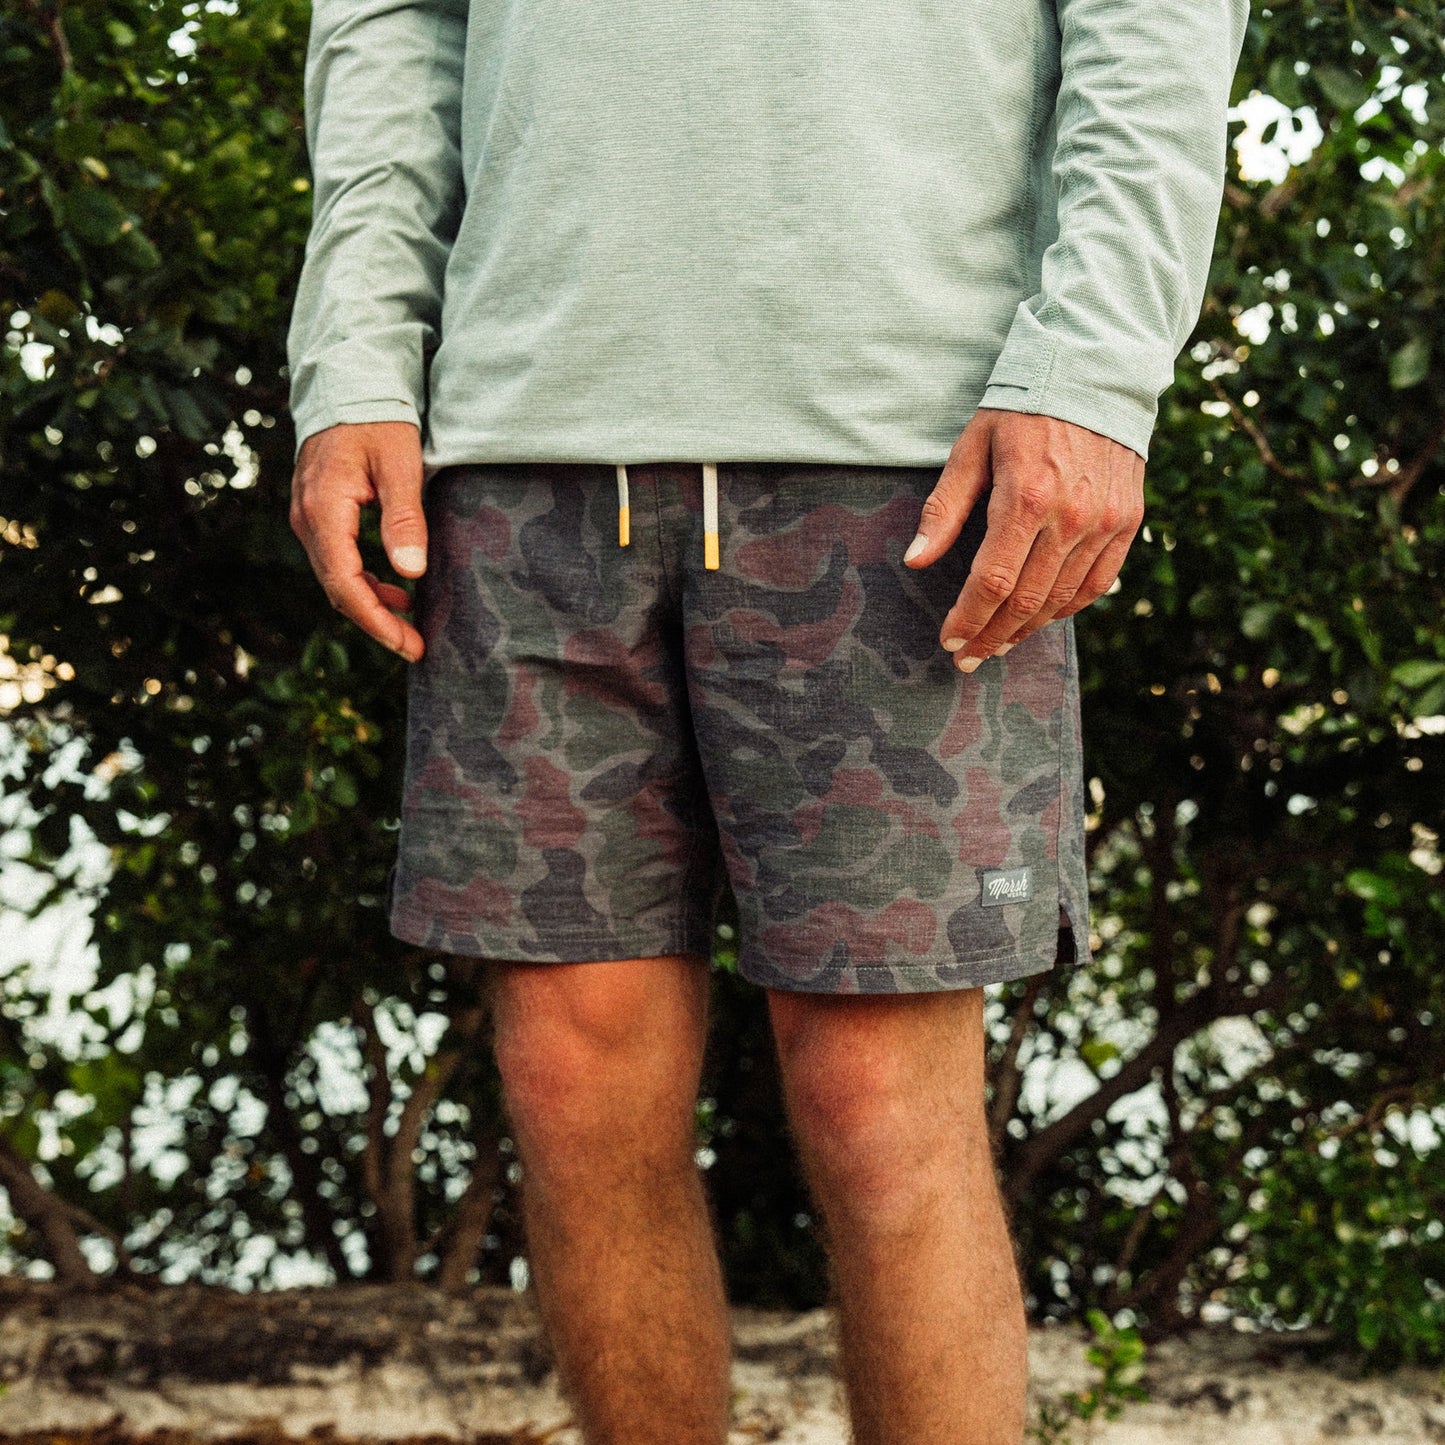 Marsh Wear Fulton Lined Volley Shorts - Dogfish Tackle & Marine